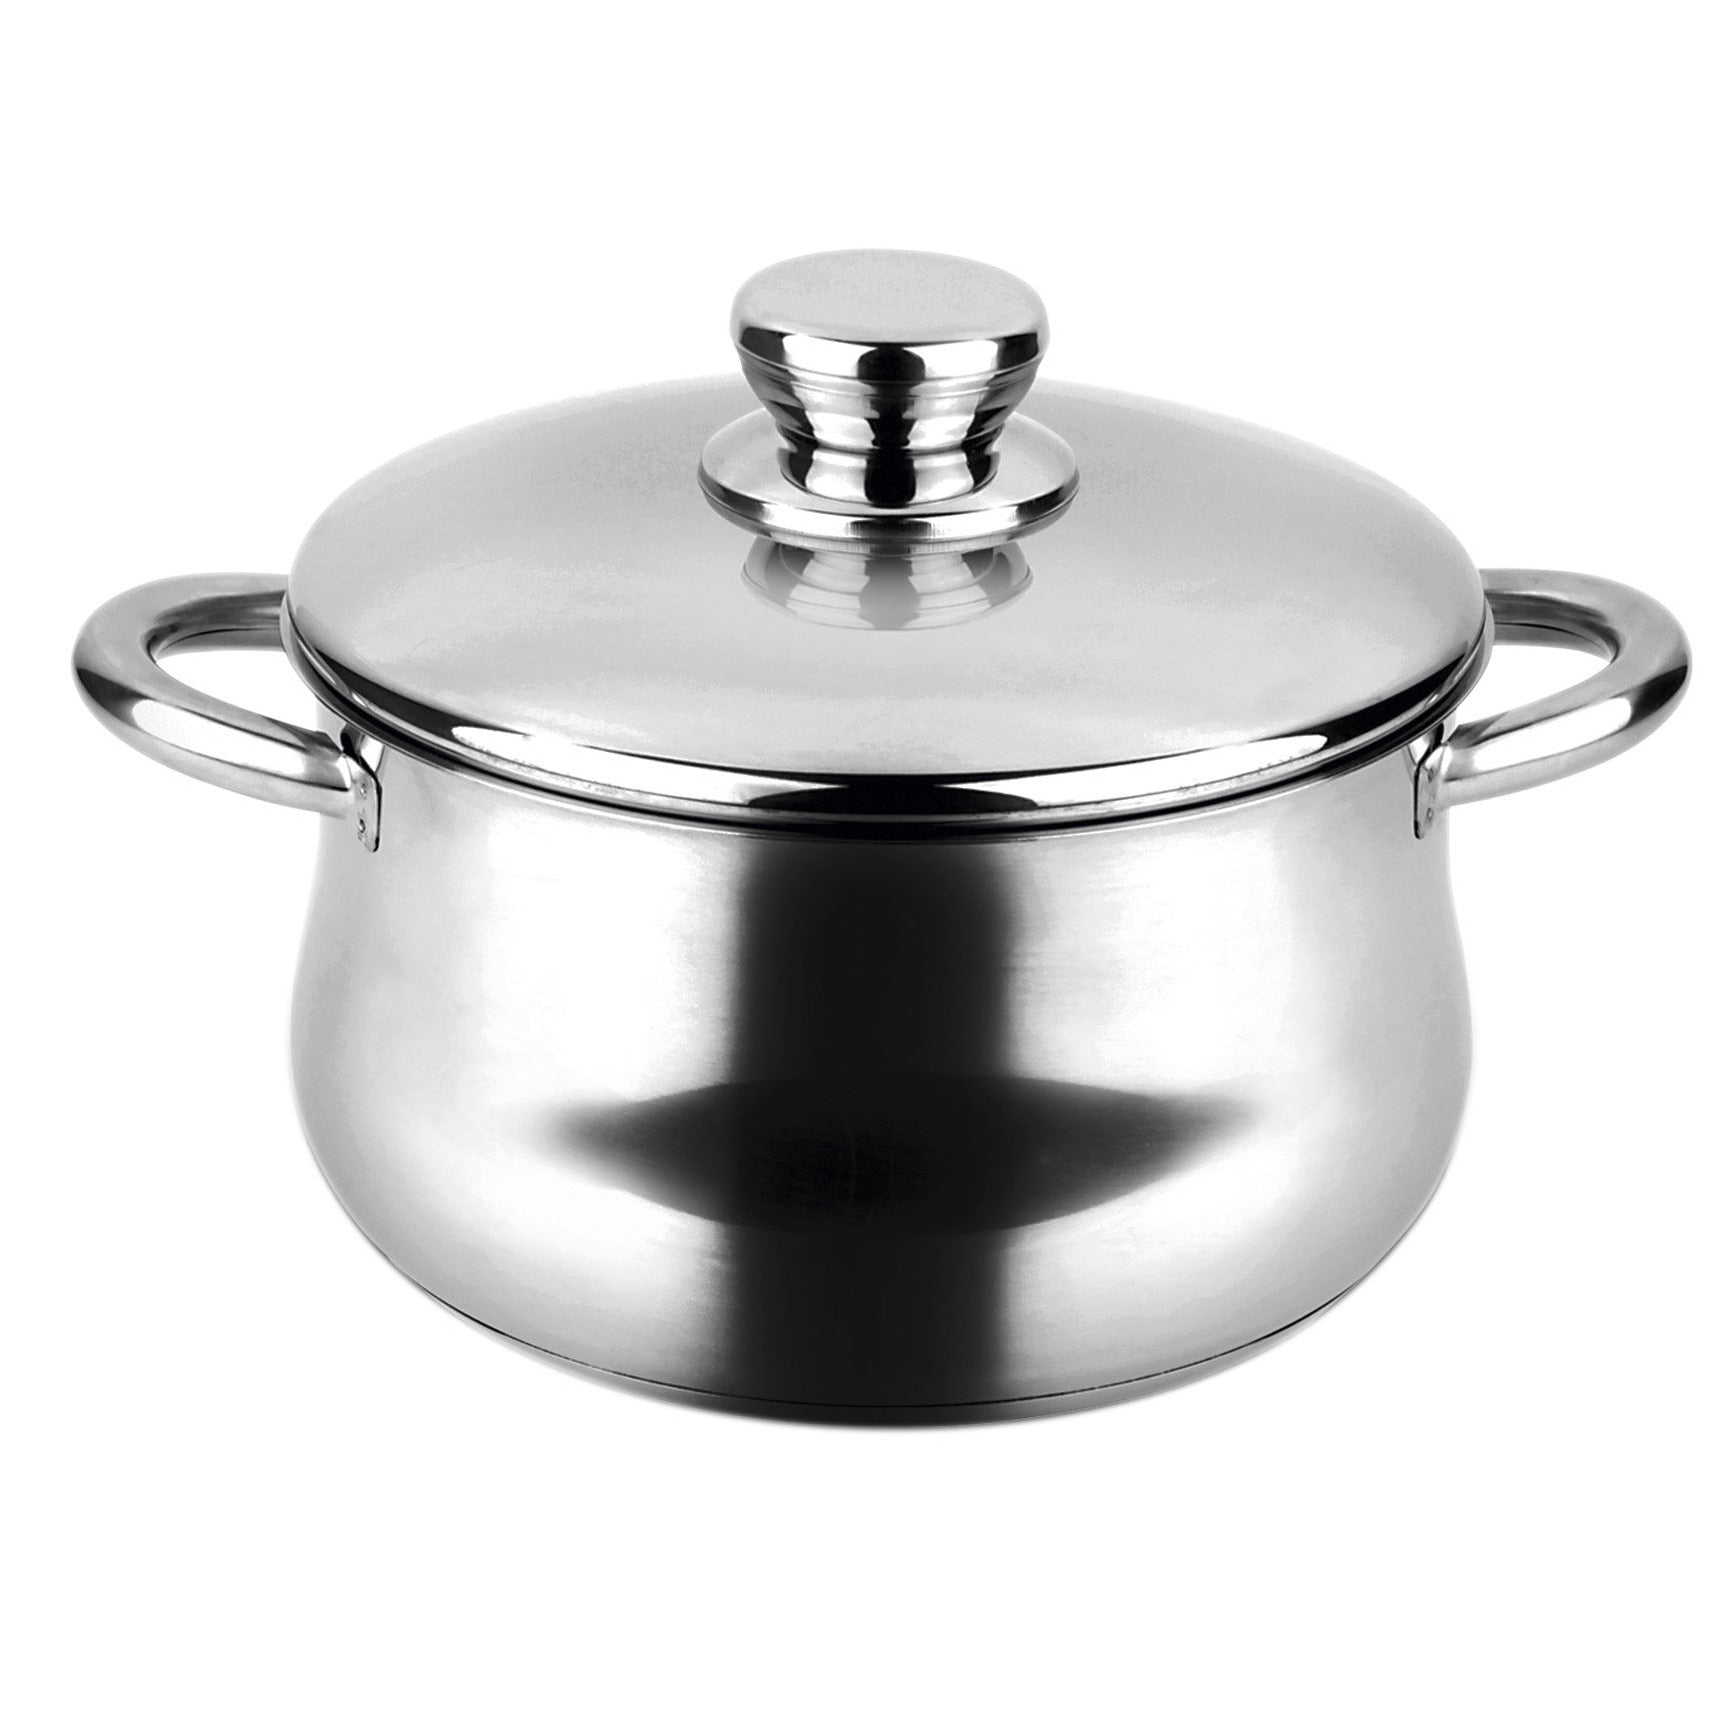 Fagor Silverinox Stockpot With Lid - Stainless